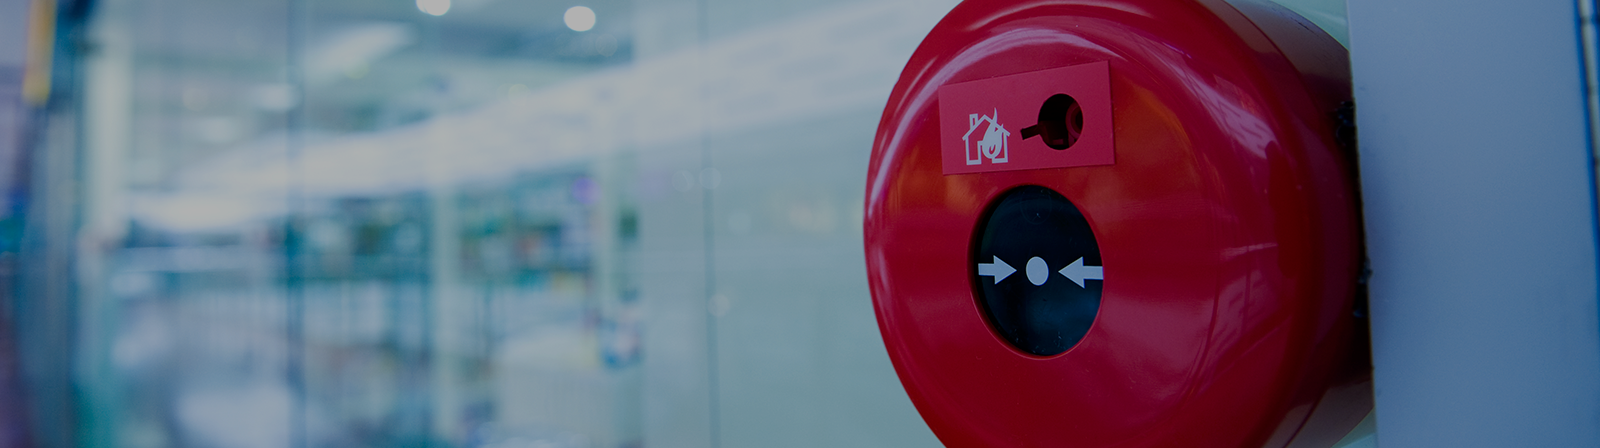 Commercial Fire Alarm System Design and Installation in Toronto, ON